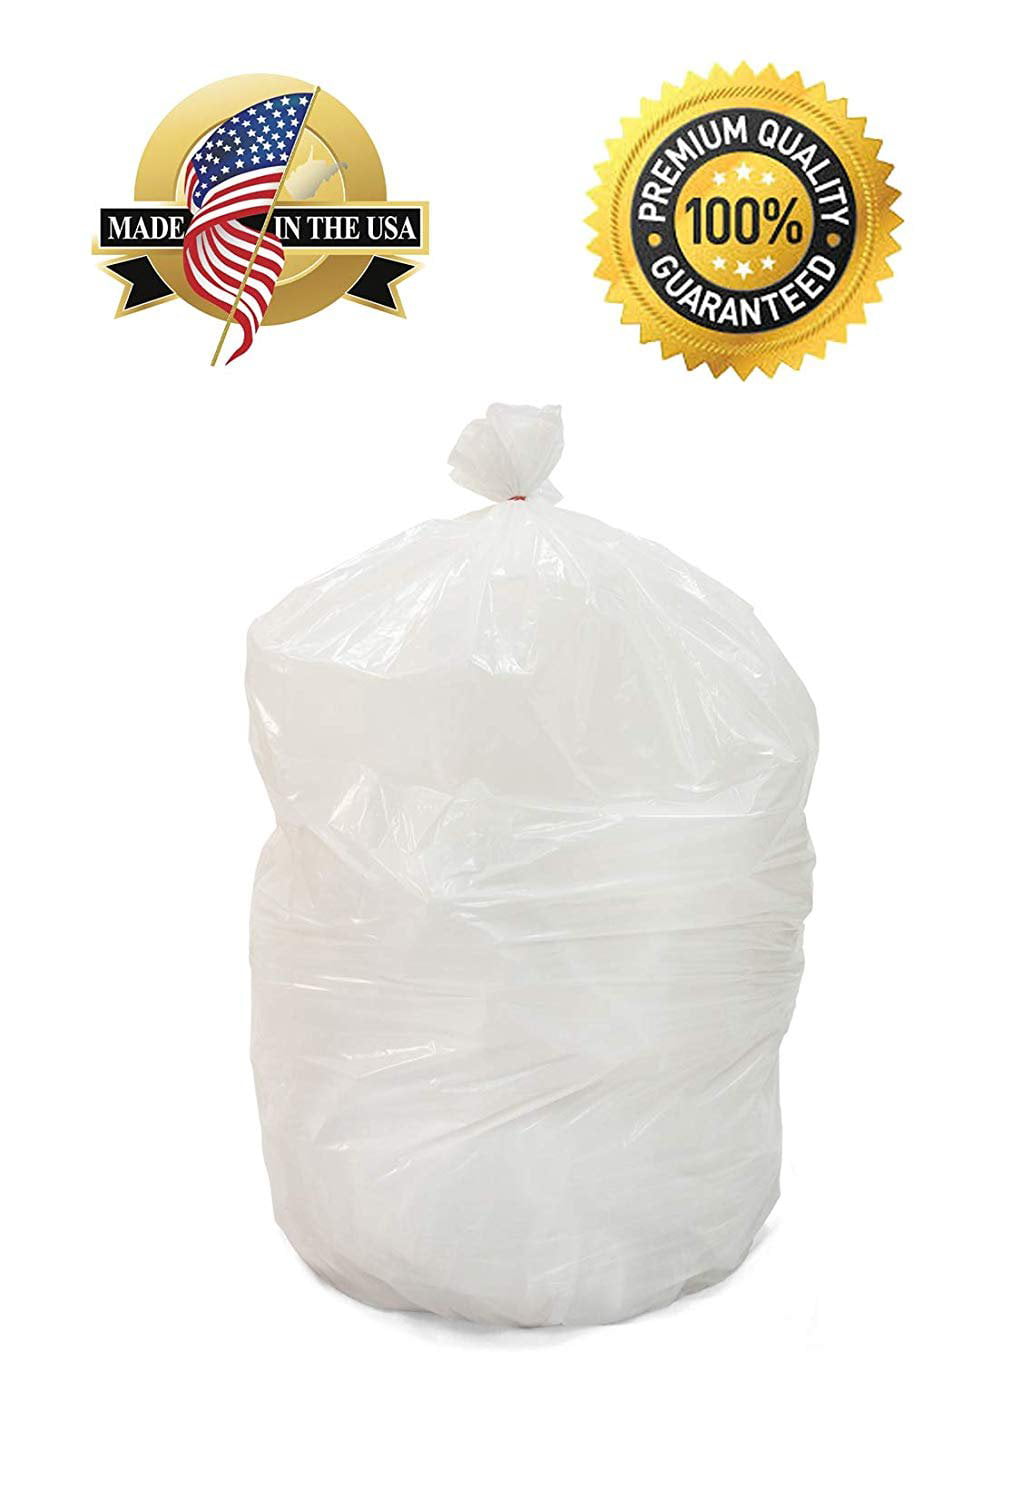 APQ Pack of 100 Regular Duty Trash Bags, Clear 43 x 47. High Density  Plastic Trash Bags 43x47. Thickness 0.7 Mil. 56 Gallon Garbage Bin Liners  for